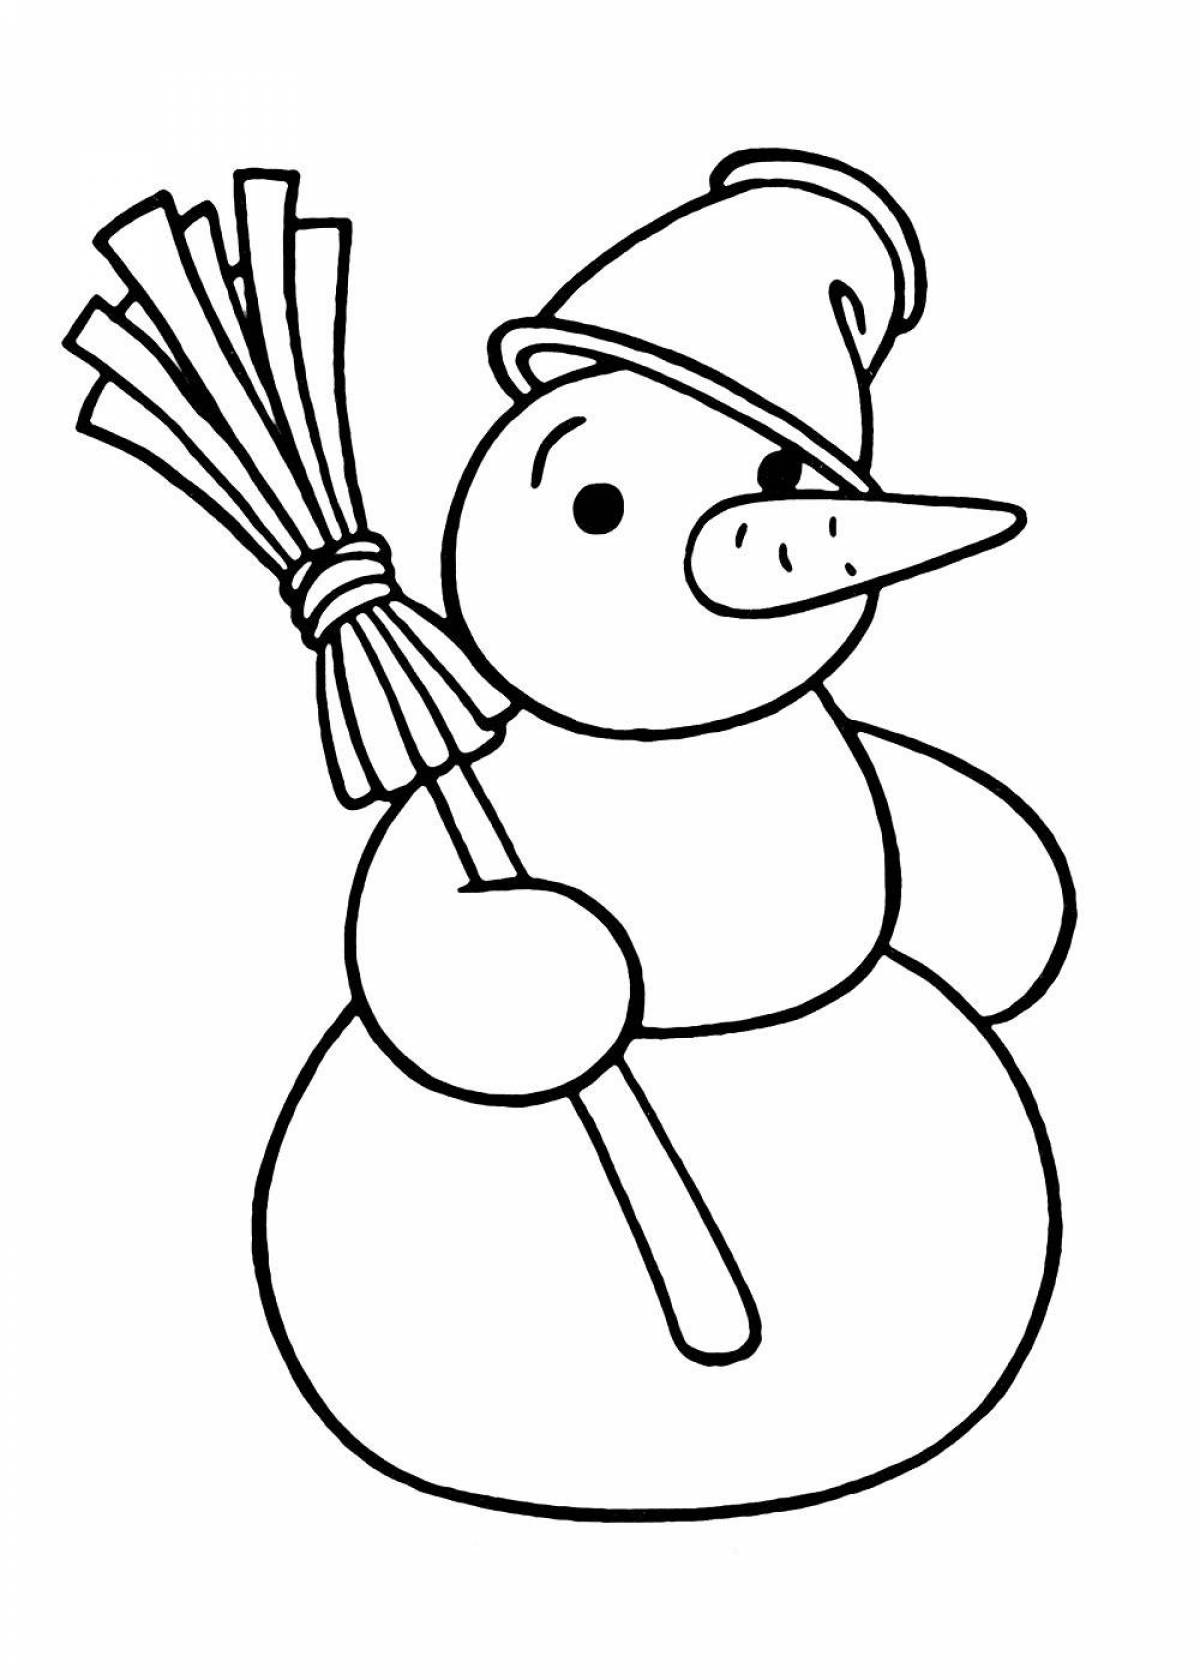 Sparkling snowman coloring for kids